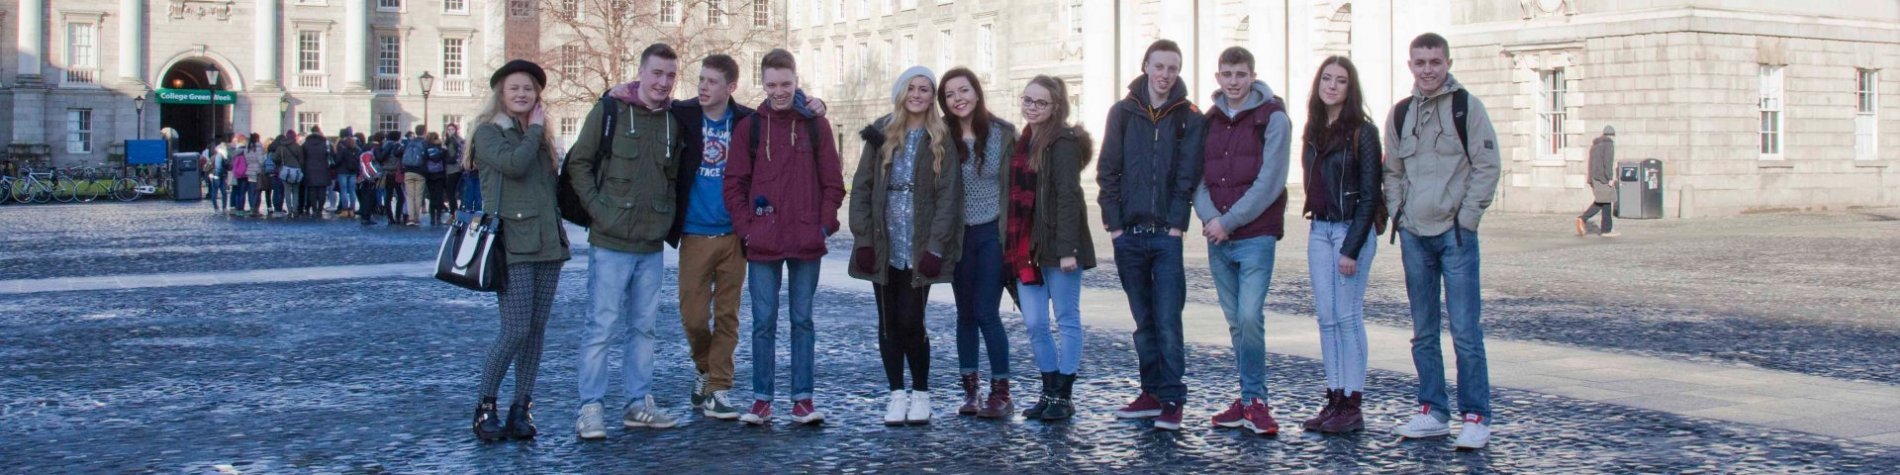 Group of students on a tour in Dublin - visiting Trinity College